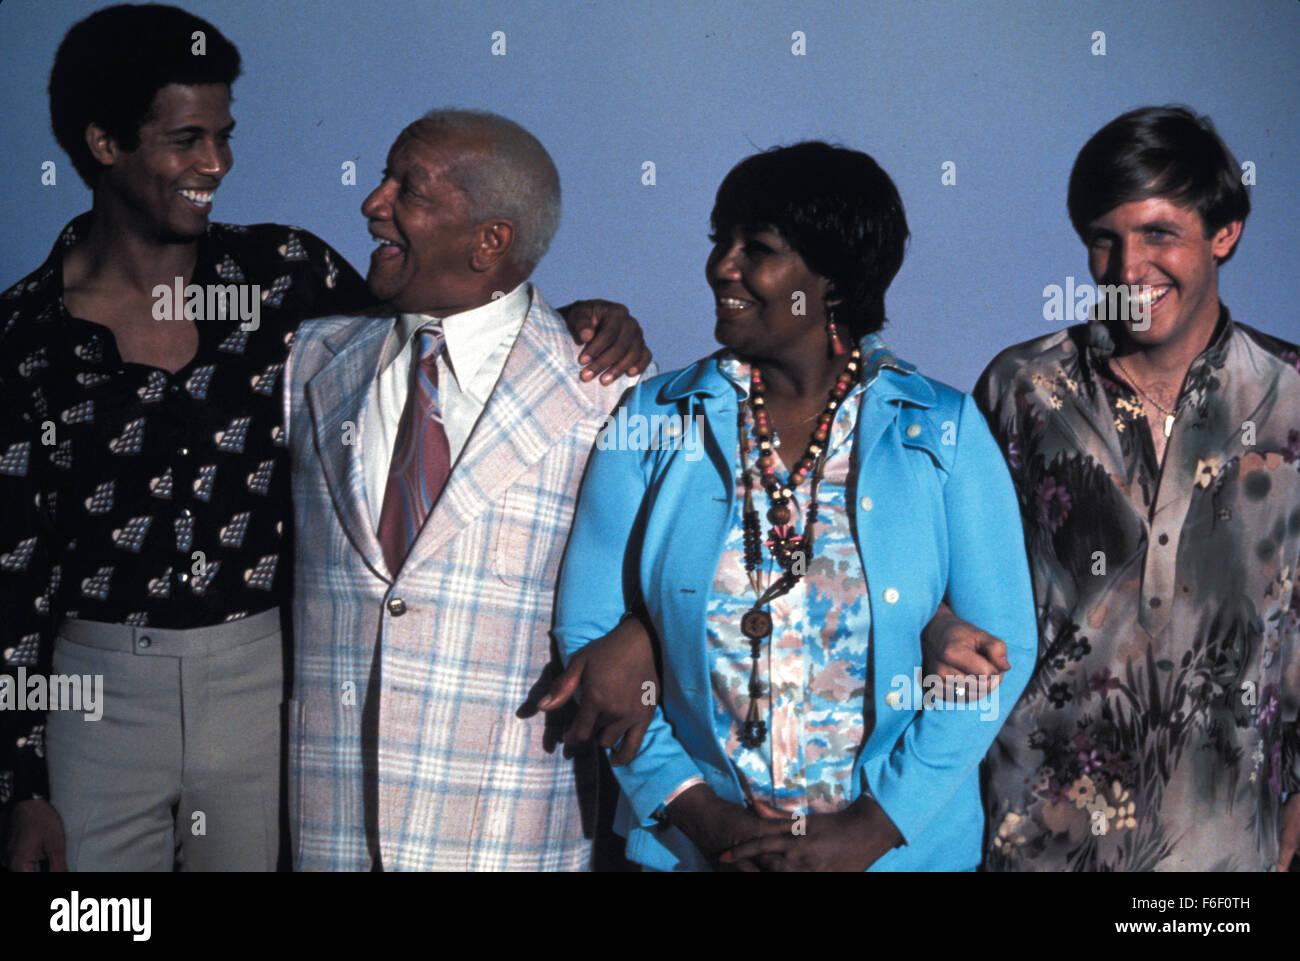 RELEASE DATE: September 29, 1976. MOVIE TITLE: Norman Is That You. STUDIO: Metro-Goldwyn-Mayer (MGM). PLOT: . PICTURED: REDD FOXX as Ben Chambers, DENNIS DUGAN as Garson Hobart and PEARL BAILEY as Beatrice Chambers. Stock Photo